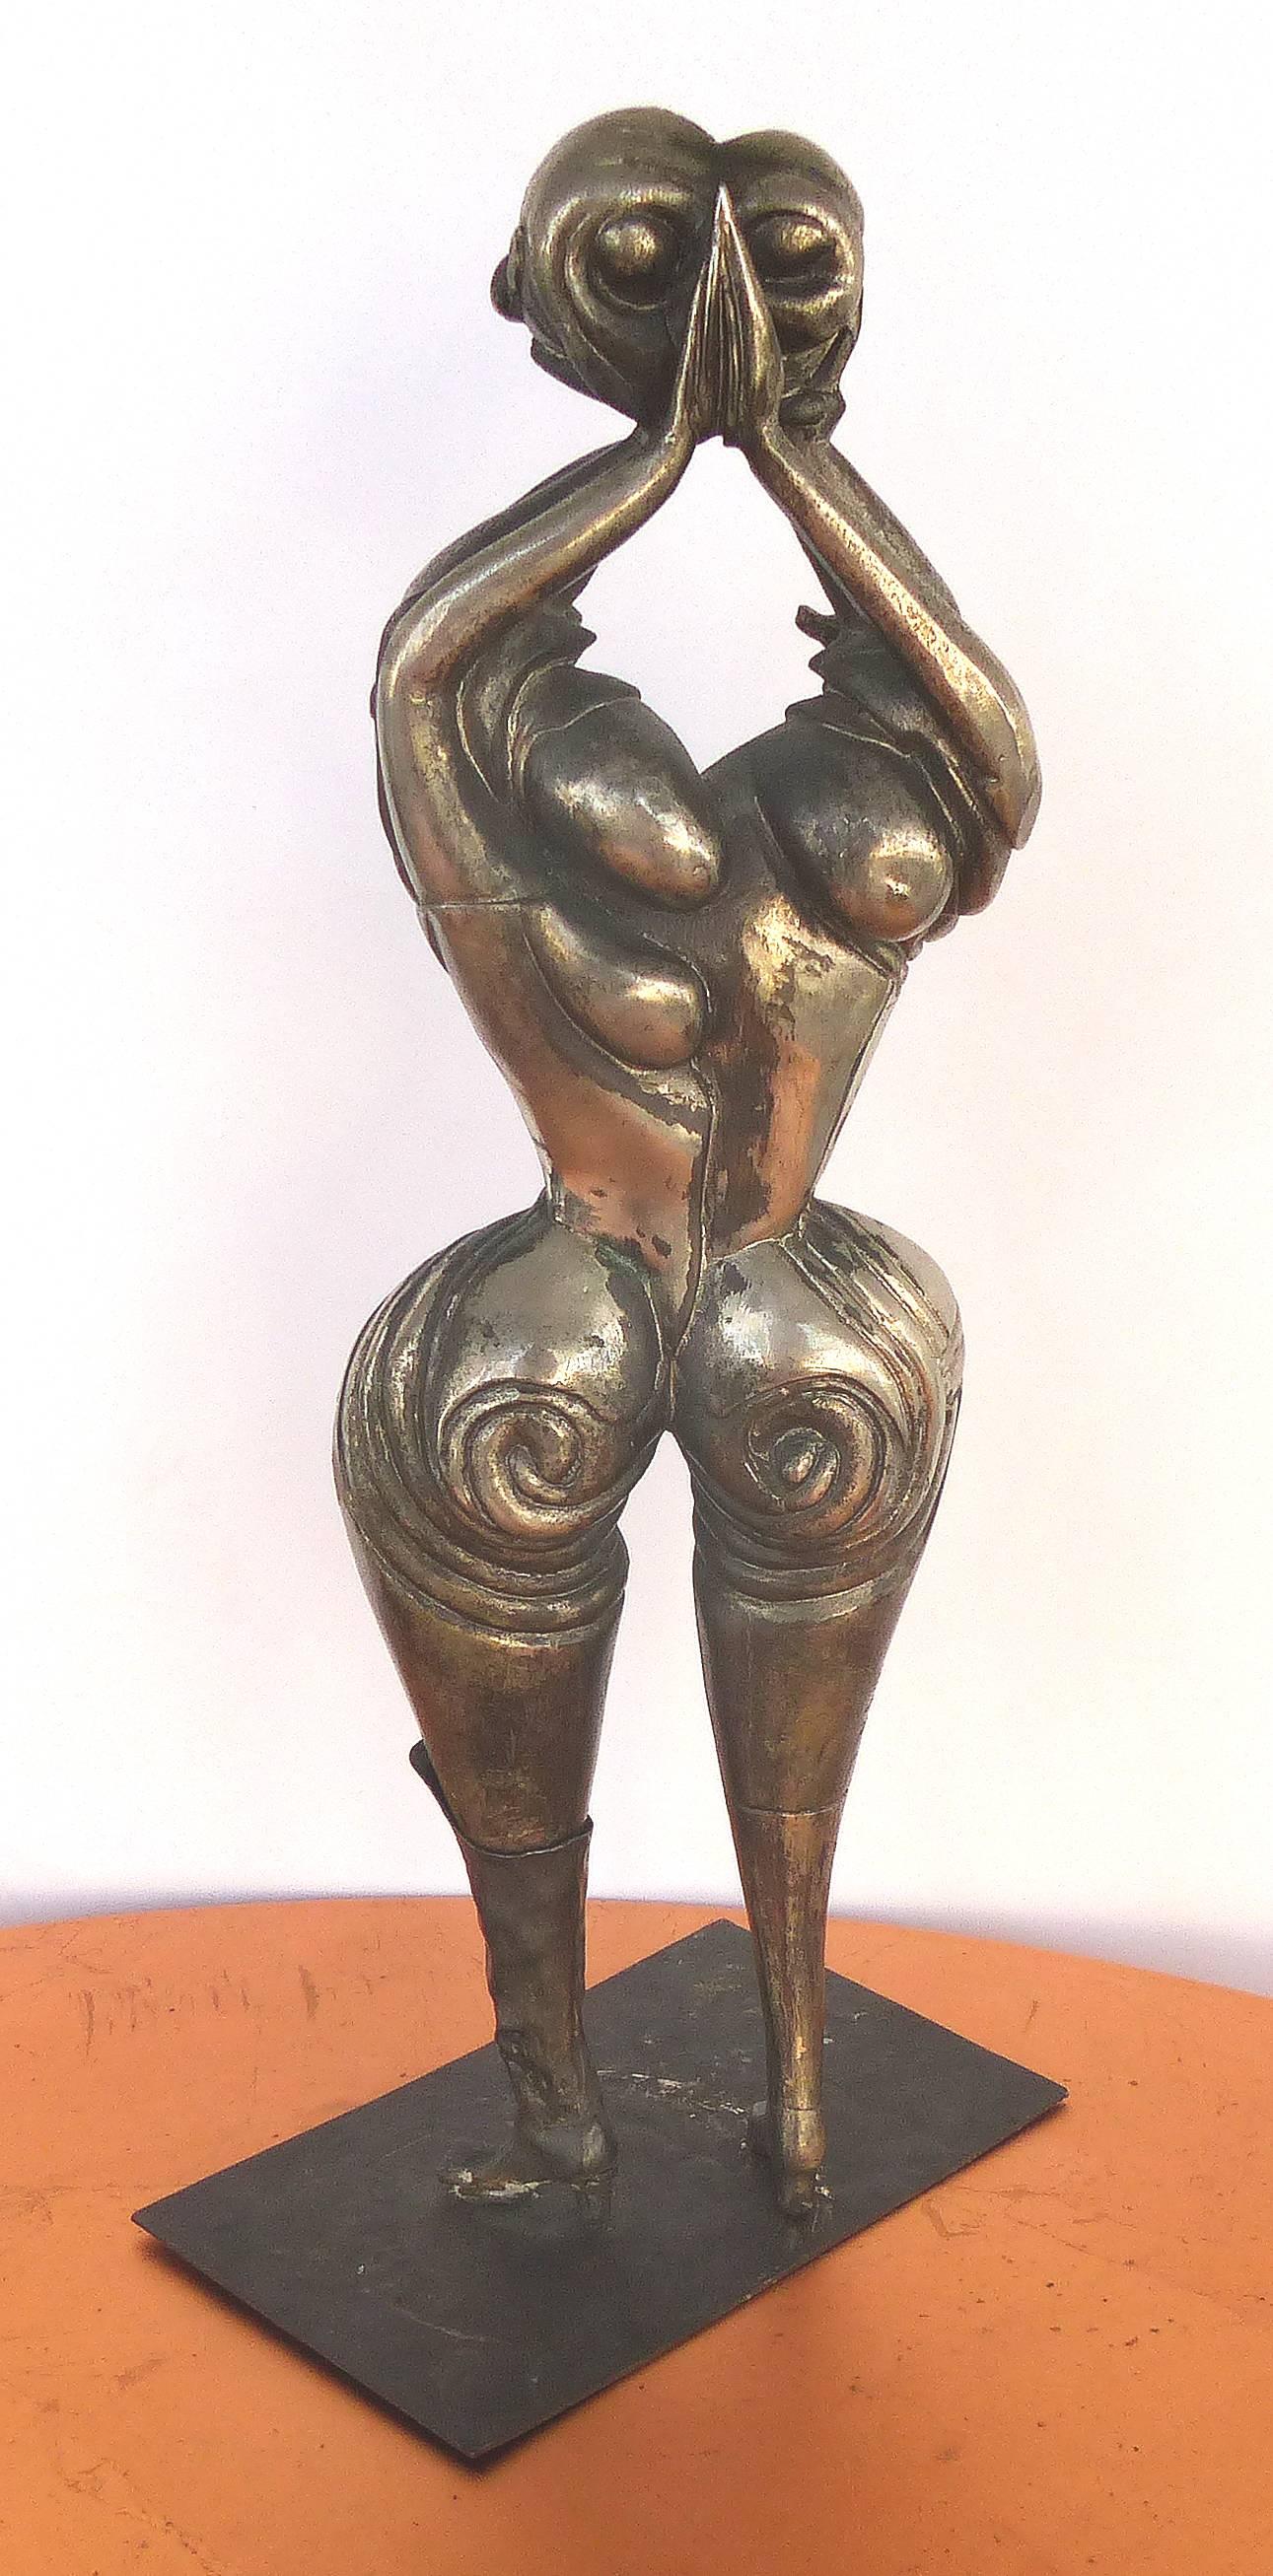 Offered for sale is a wonderful surrealist figurative silvered bronze sculpture of a two-faced modernist figure with a boot on one leg and an iron base. Base, 5.25